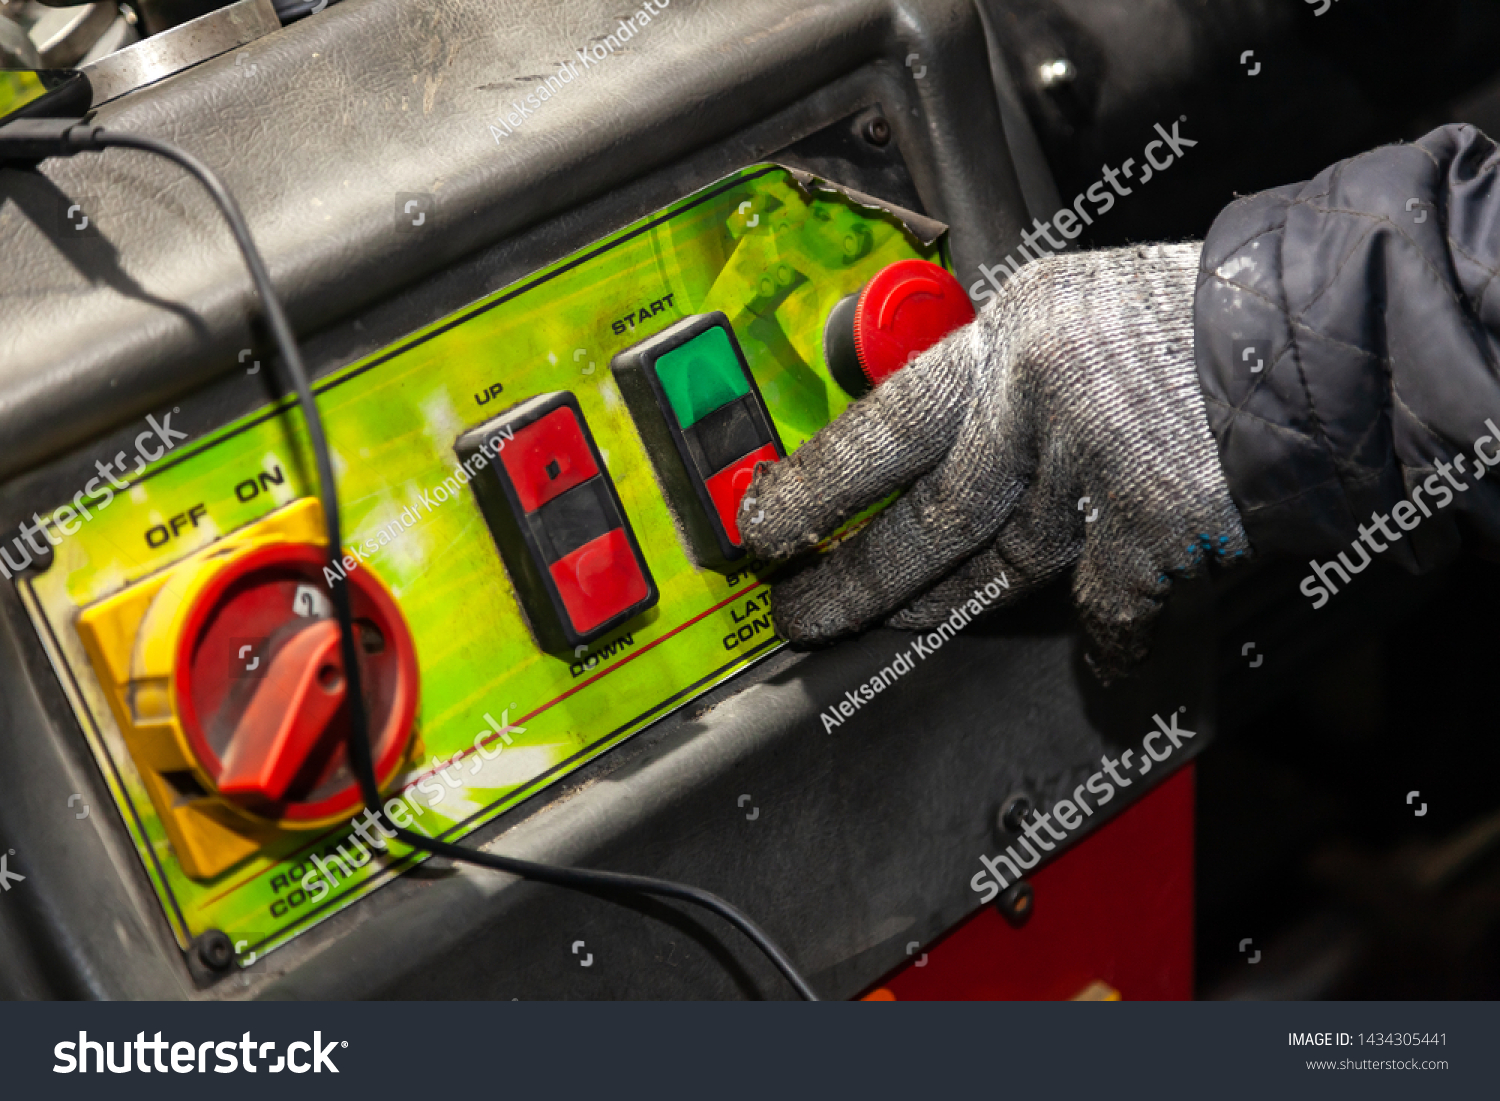 A male worker in working gloves presses the red button on the machine control panel in a workshop or factory. Industry and production in engineering. #1434305441